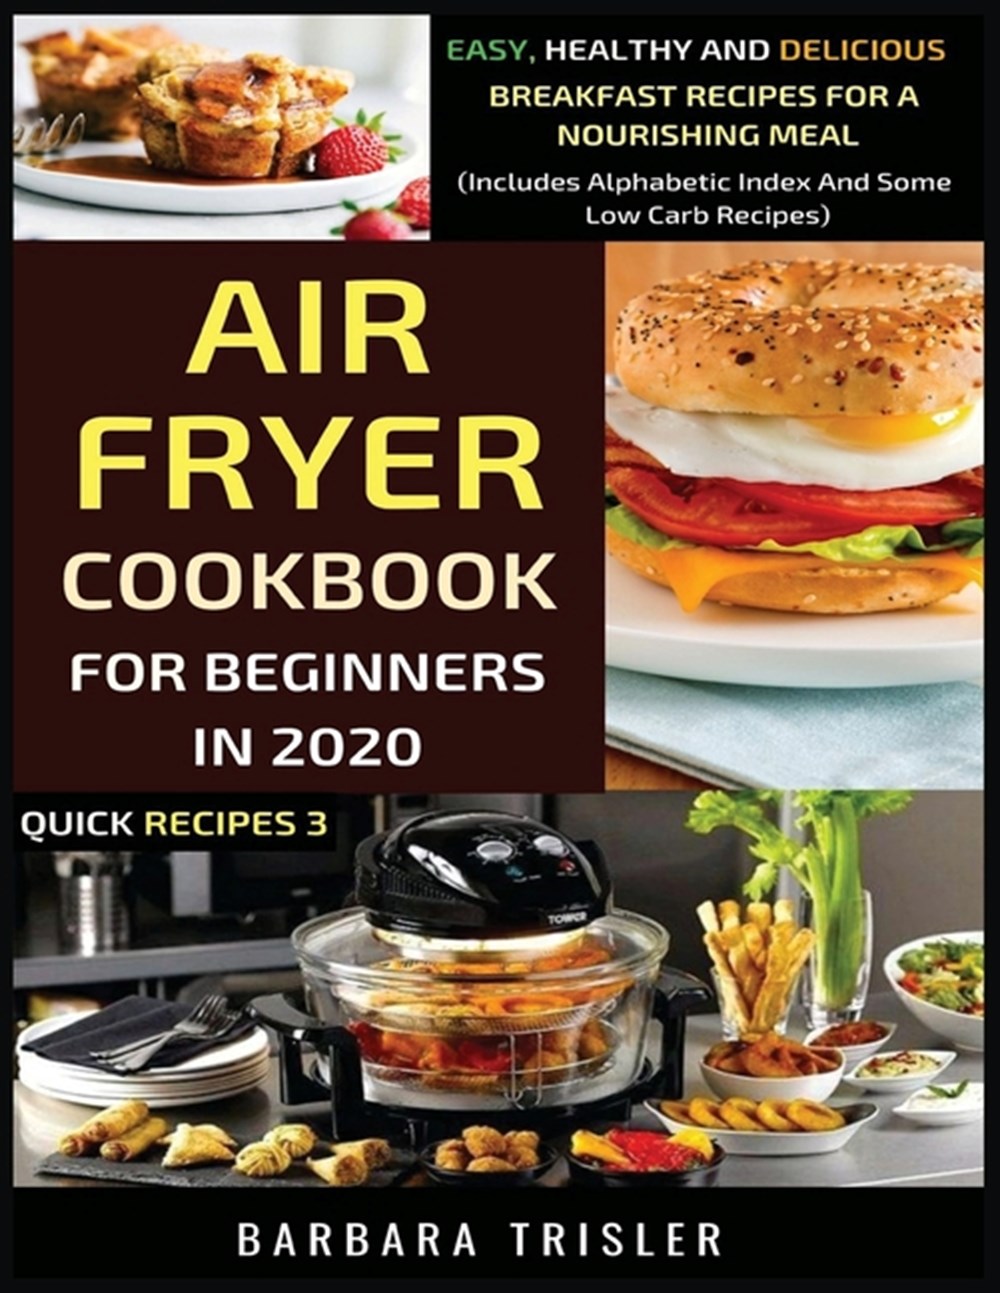 Air Fryer Cookbook For Beginners In 2020: Easy, Healthy And Delicious Breakfast Recipes For A Nouris